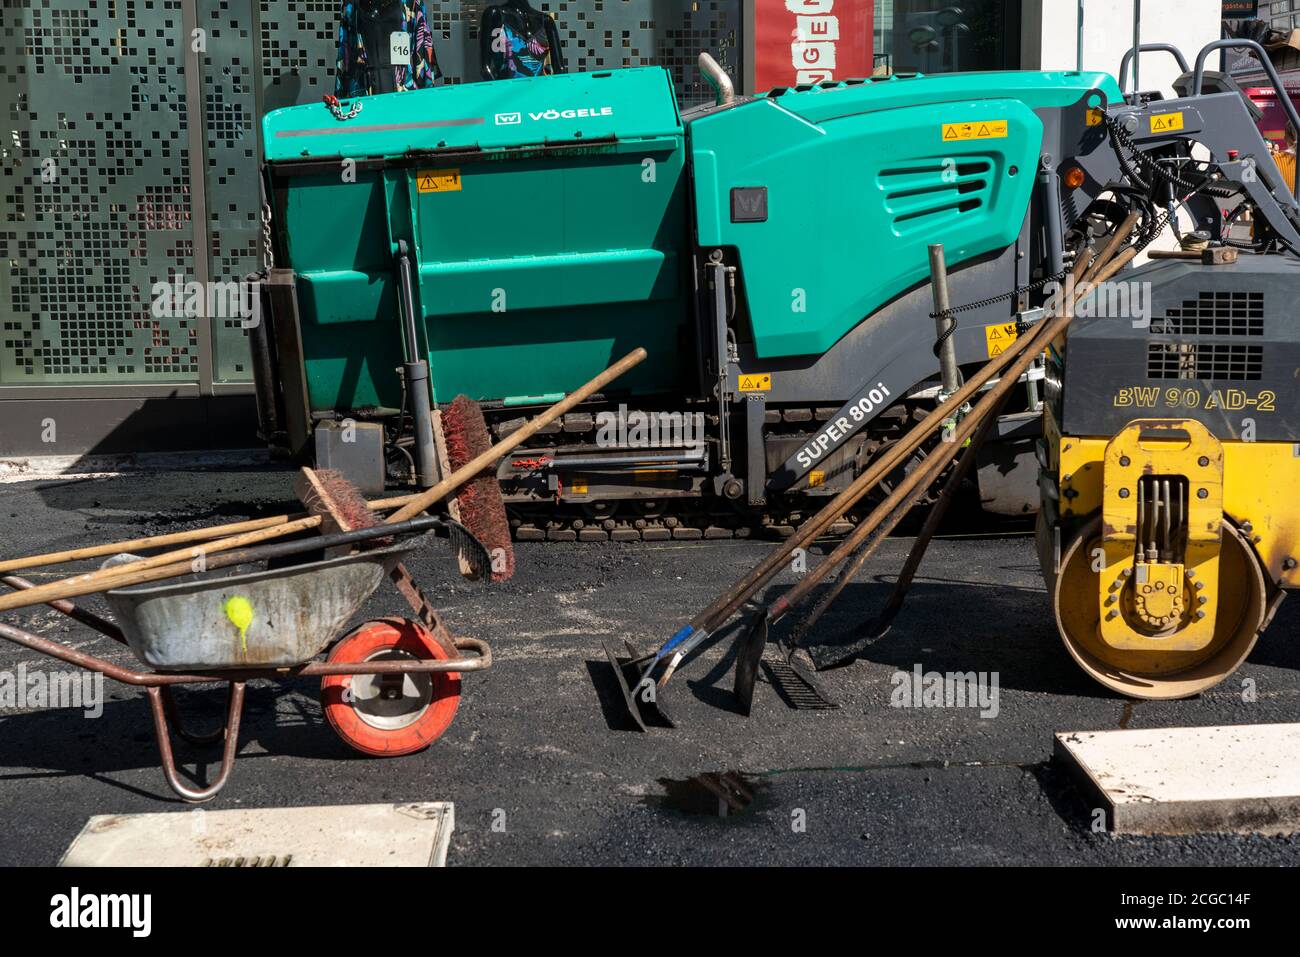 Road construction, tools and machines for asphalting a road, Düsseldorf, NRW, Germany, Stock Photo